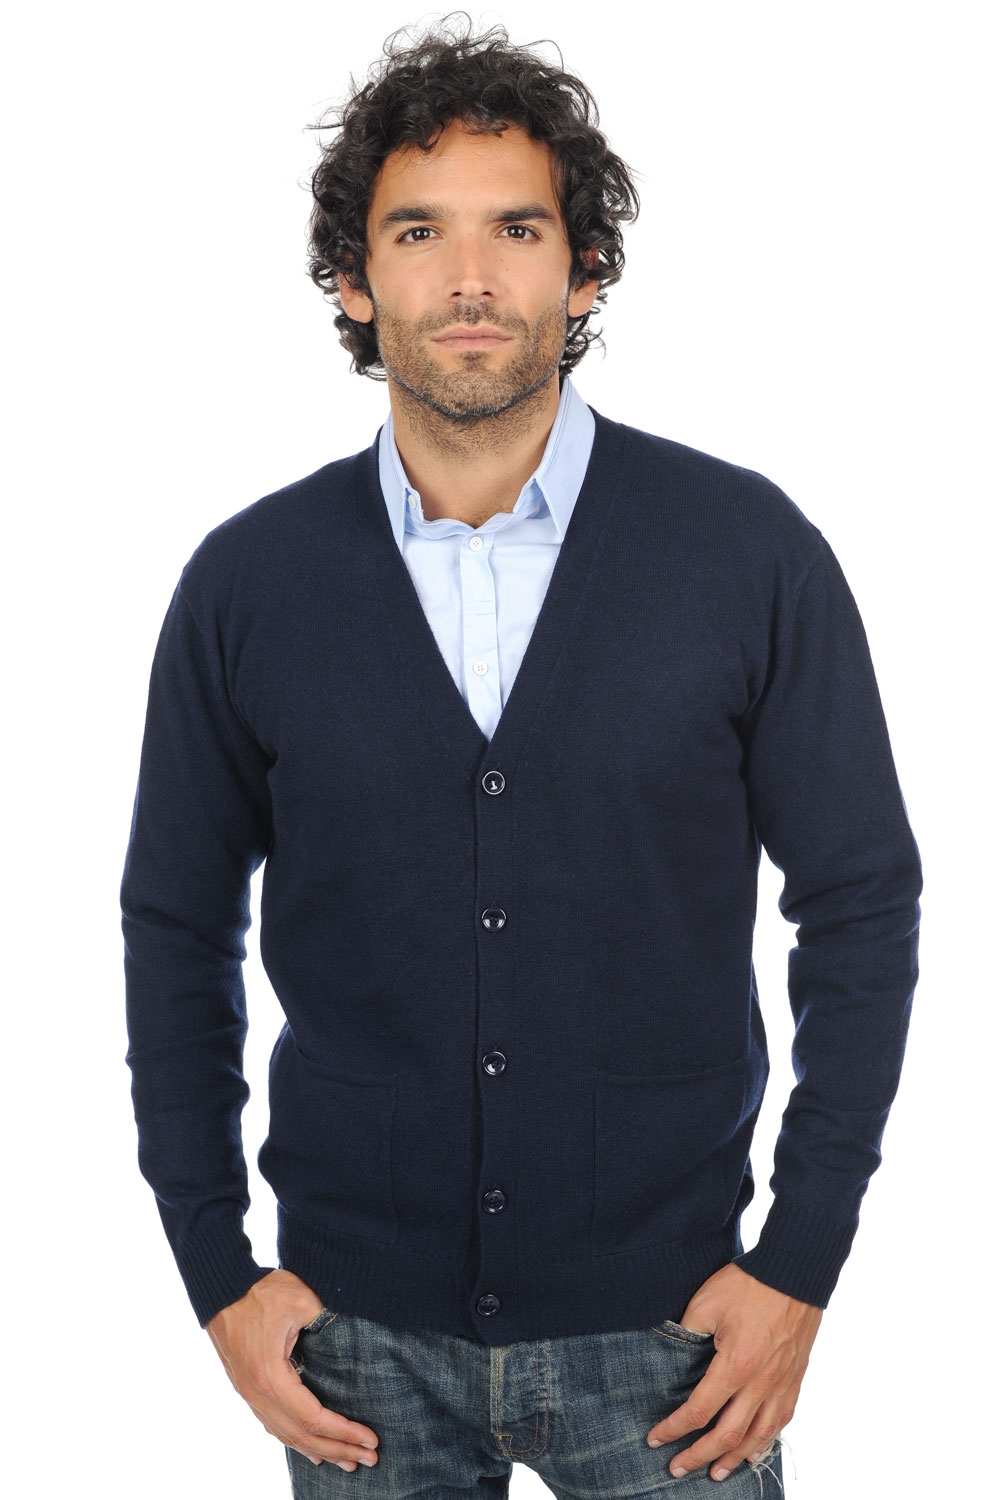 Cachemire pull homme yoni marine fonce xl